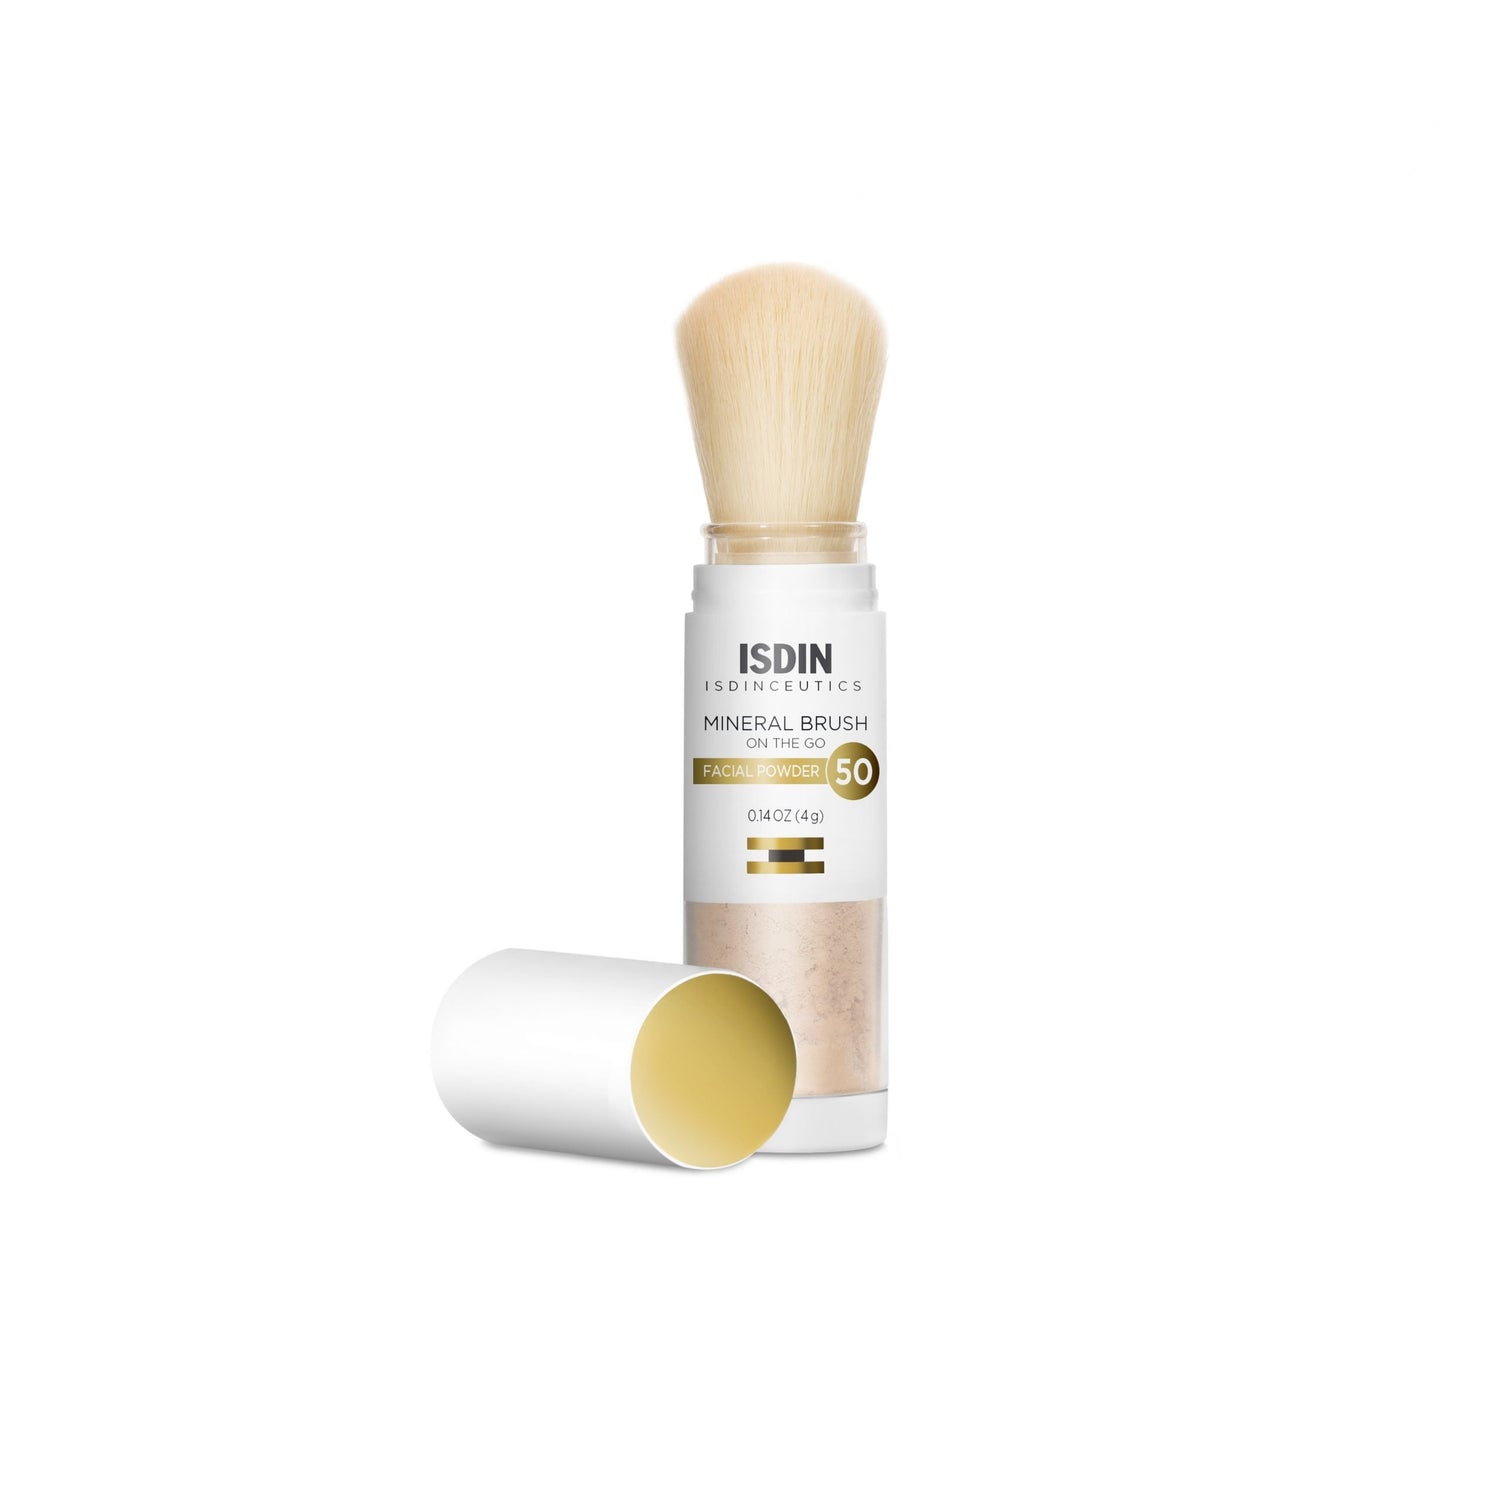 ISDIN® Mineral Brush On The Go Facial Powder